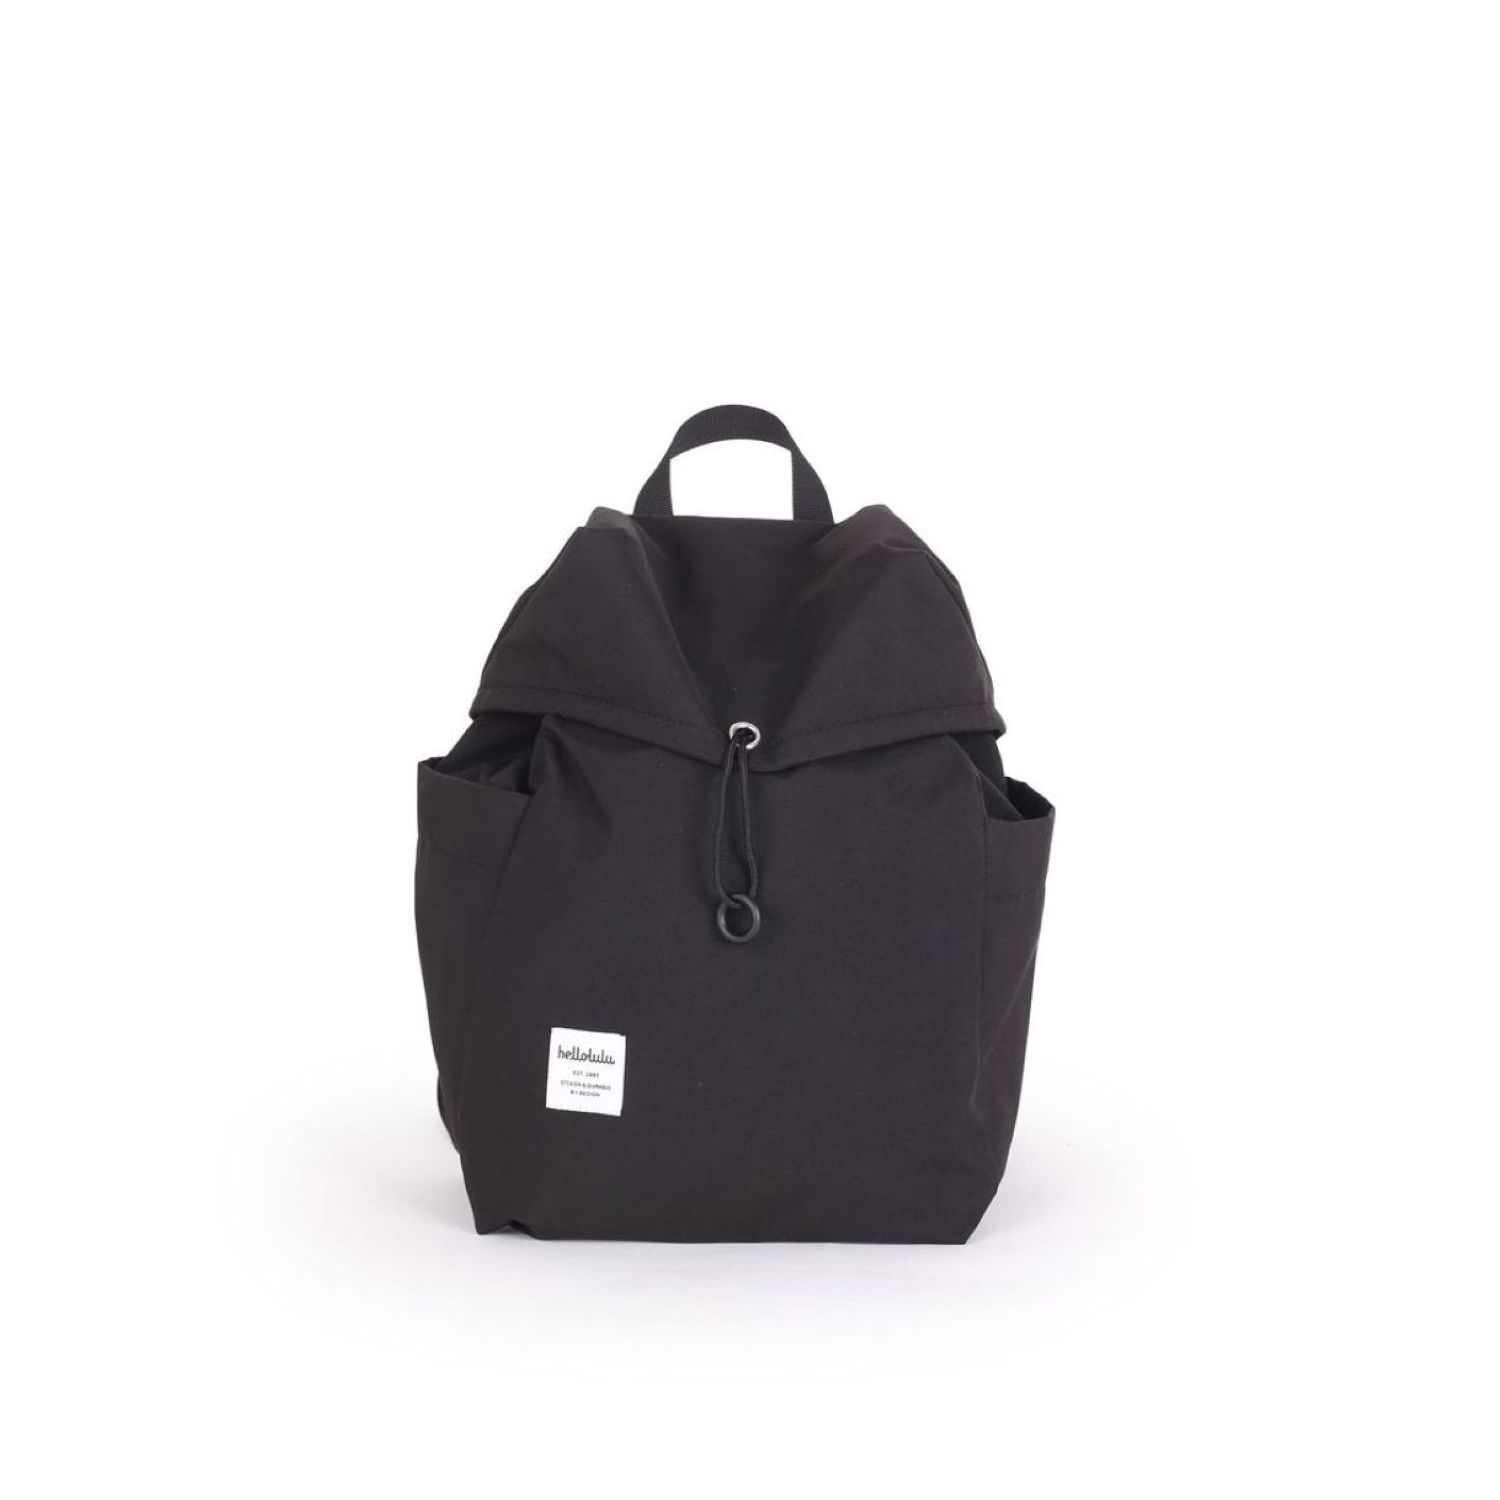 Buy Hellolulu Celeste Day Pack S (Basic Black) in Malaysia - The Wallet ...